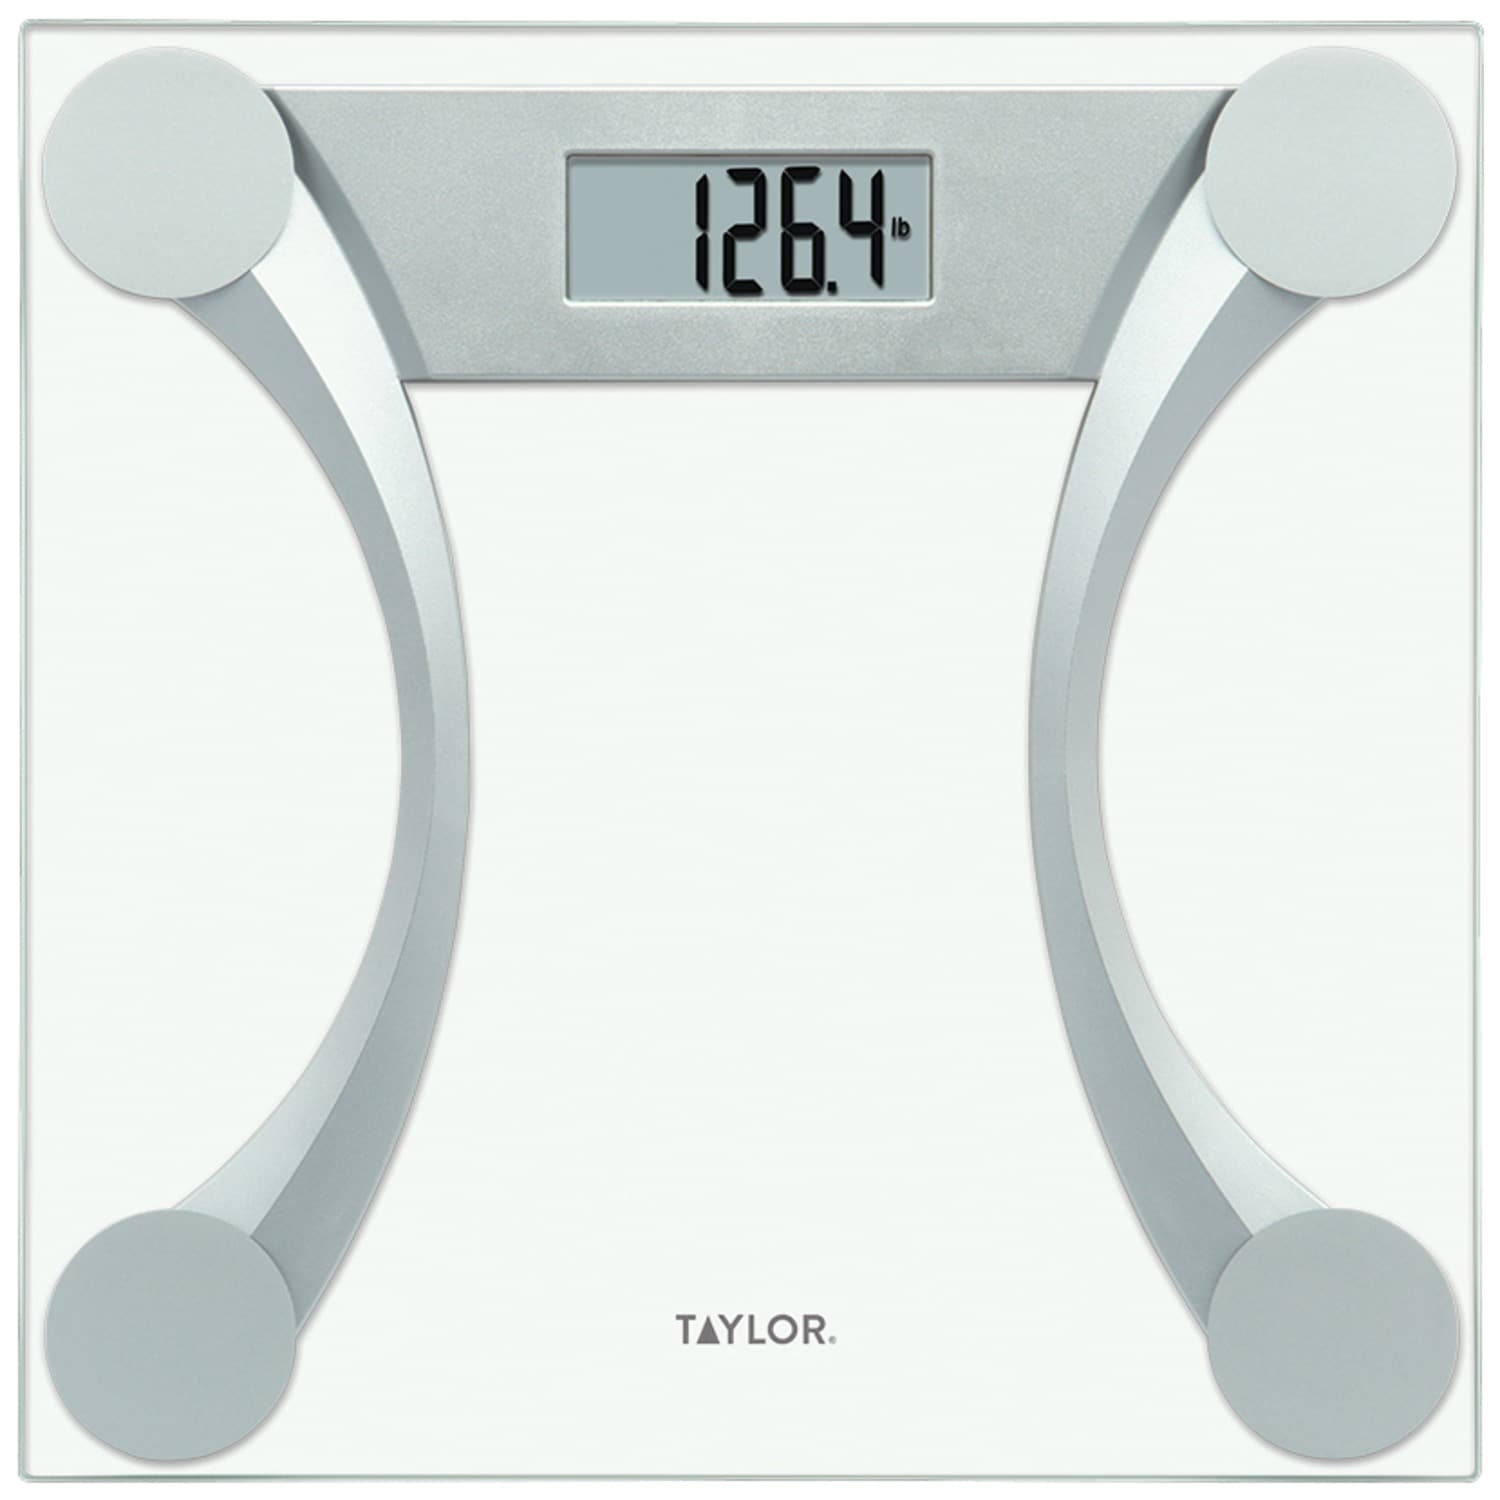 Taylor Metro Analog Bathroom Weight Scale for Sale in Las Vegas